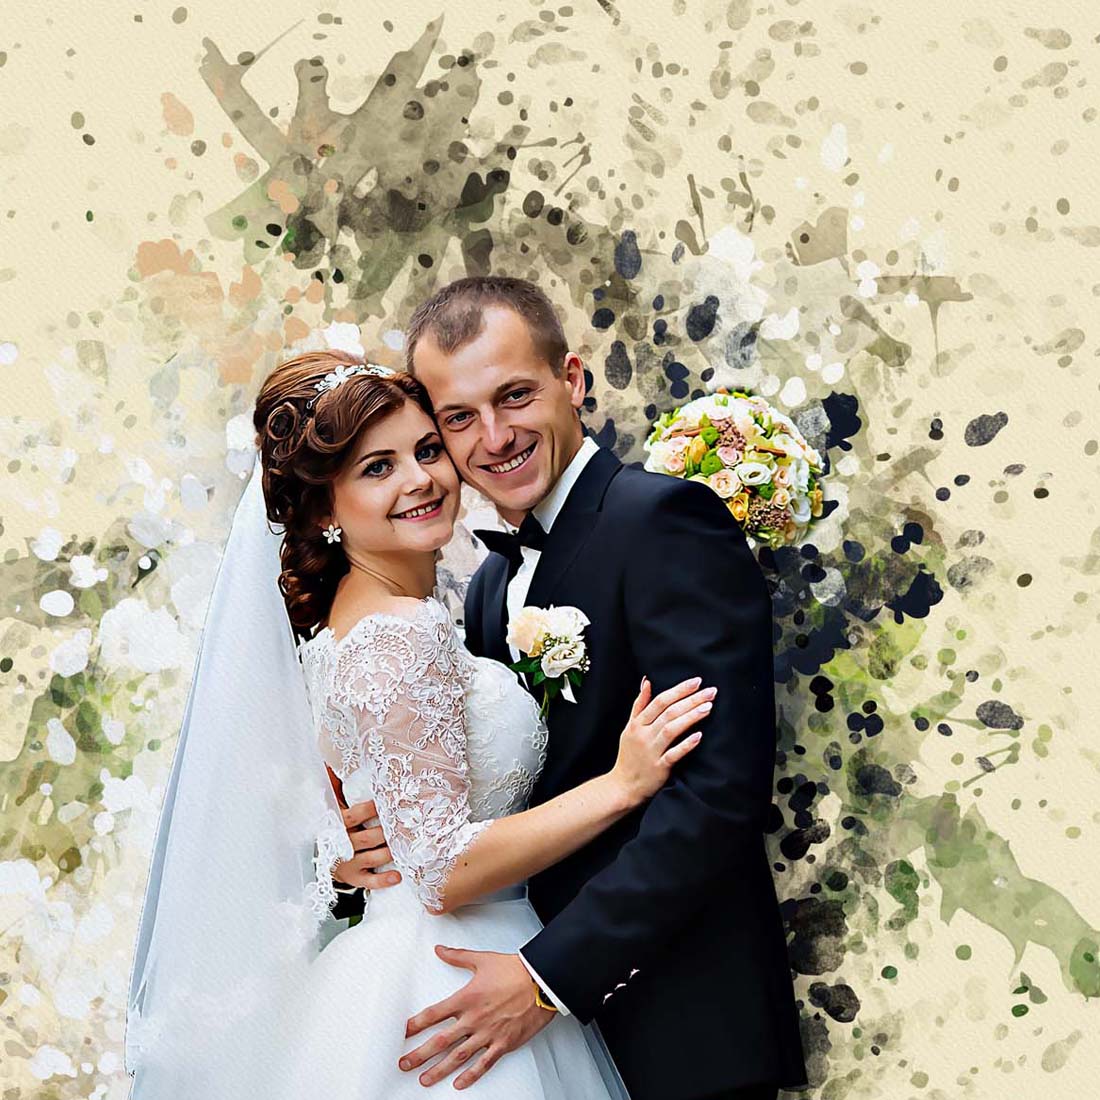 Ethereal Elegance Wedding Paint preview image.